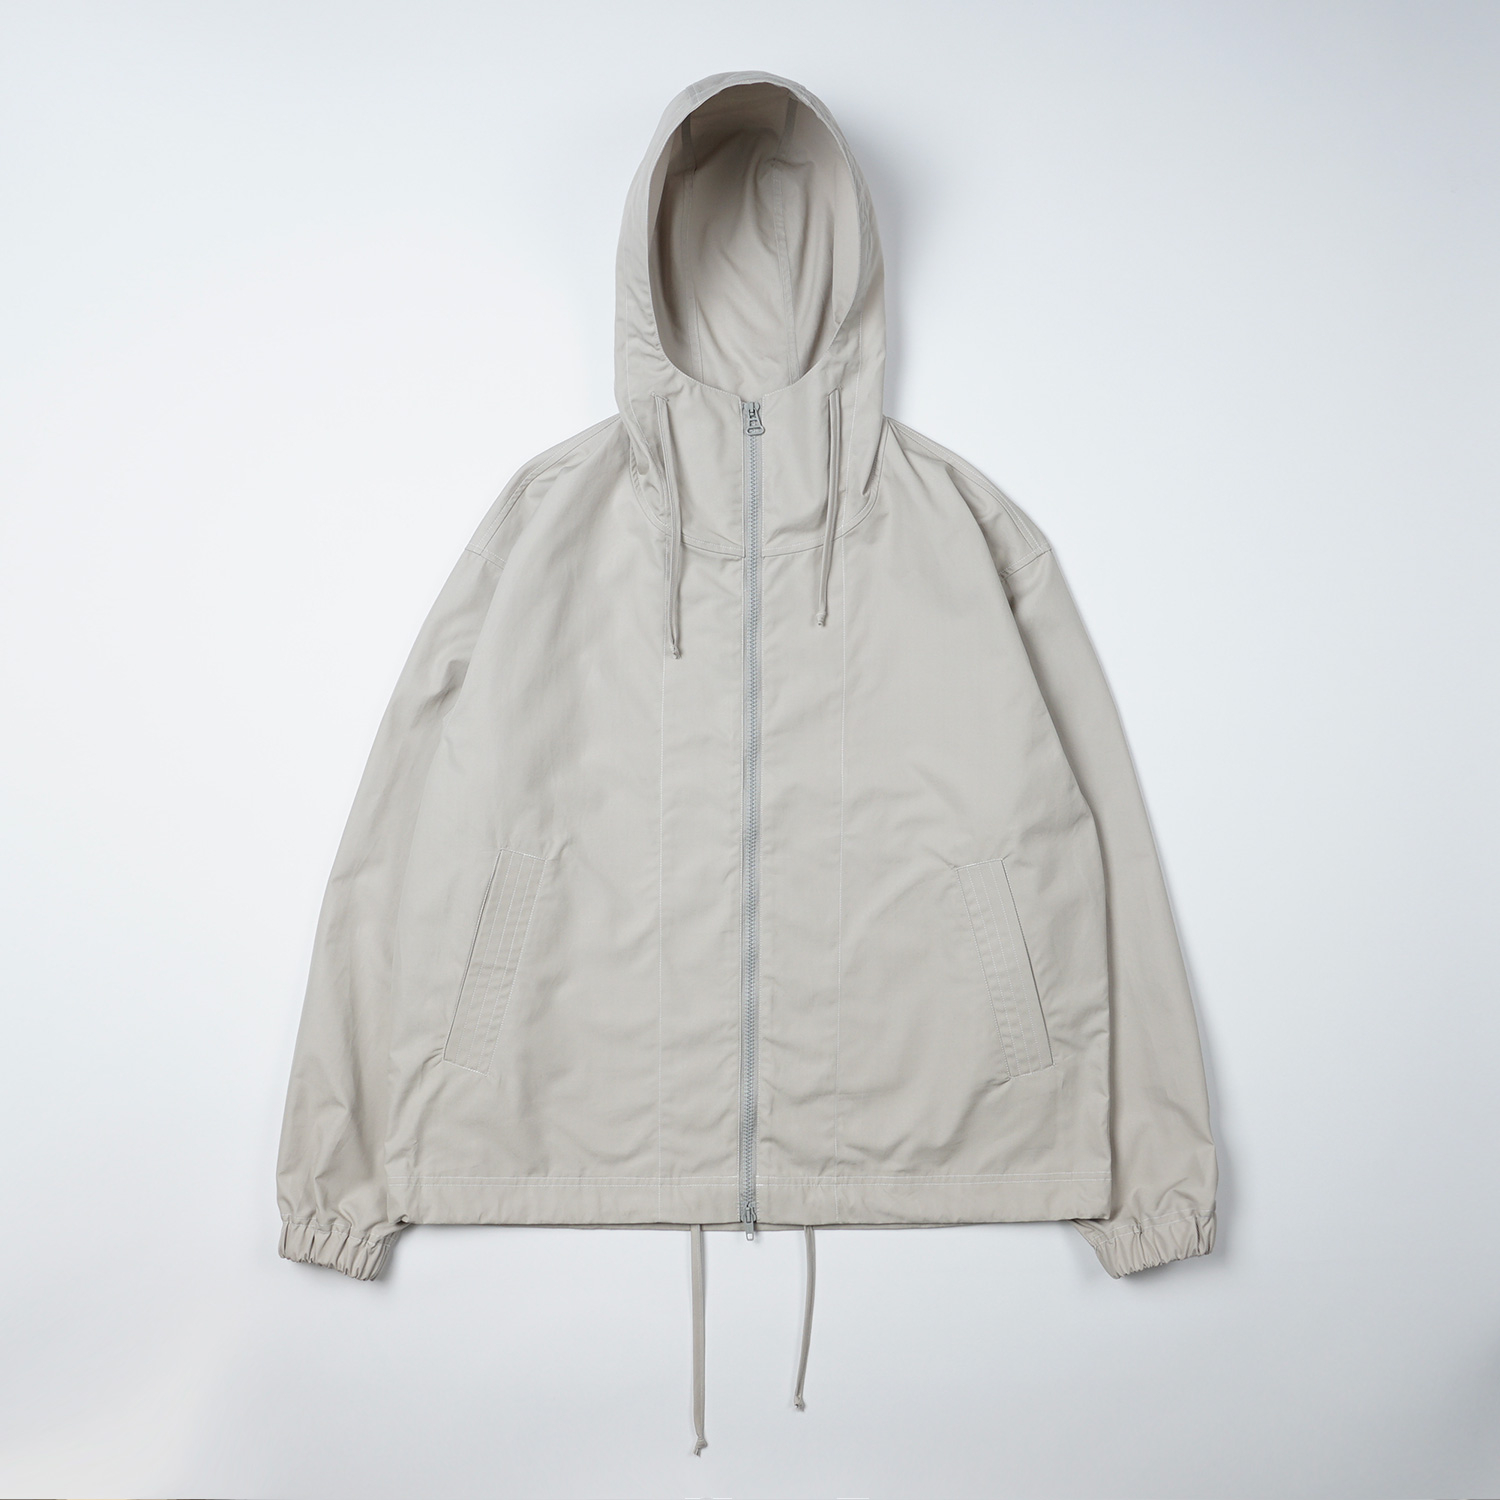 KAOLIN parka in Stone color by Arpenteur